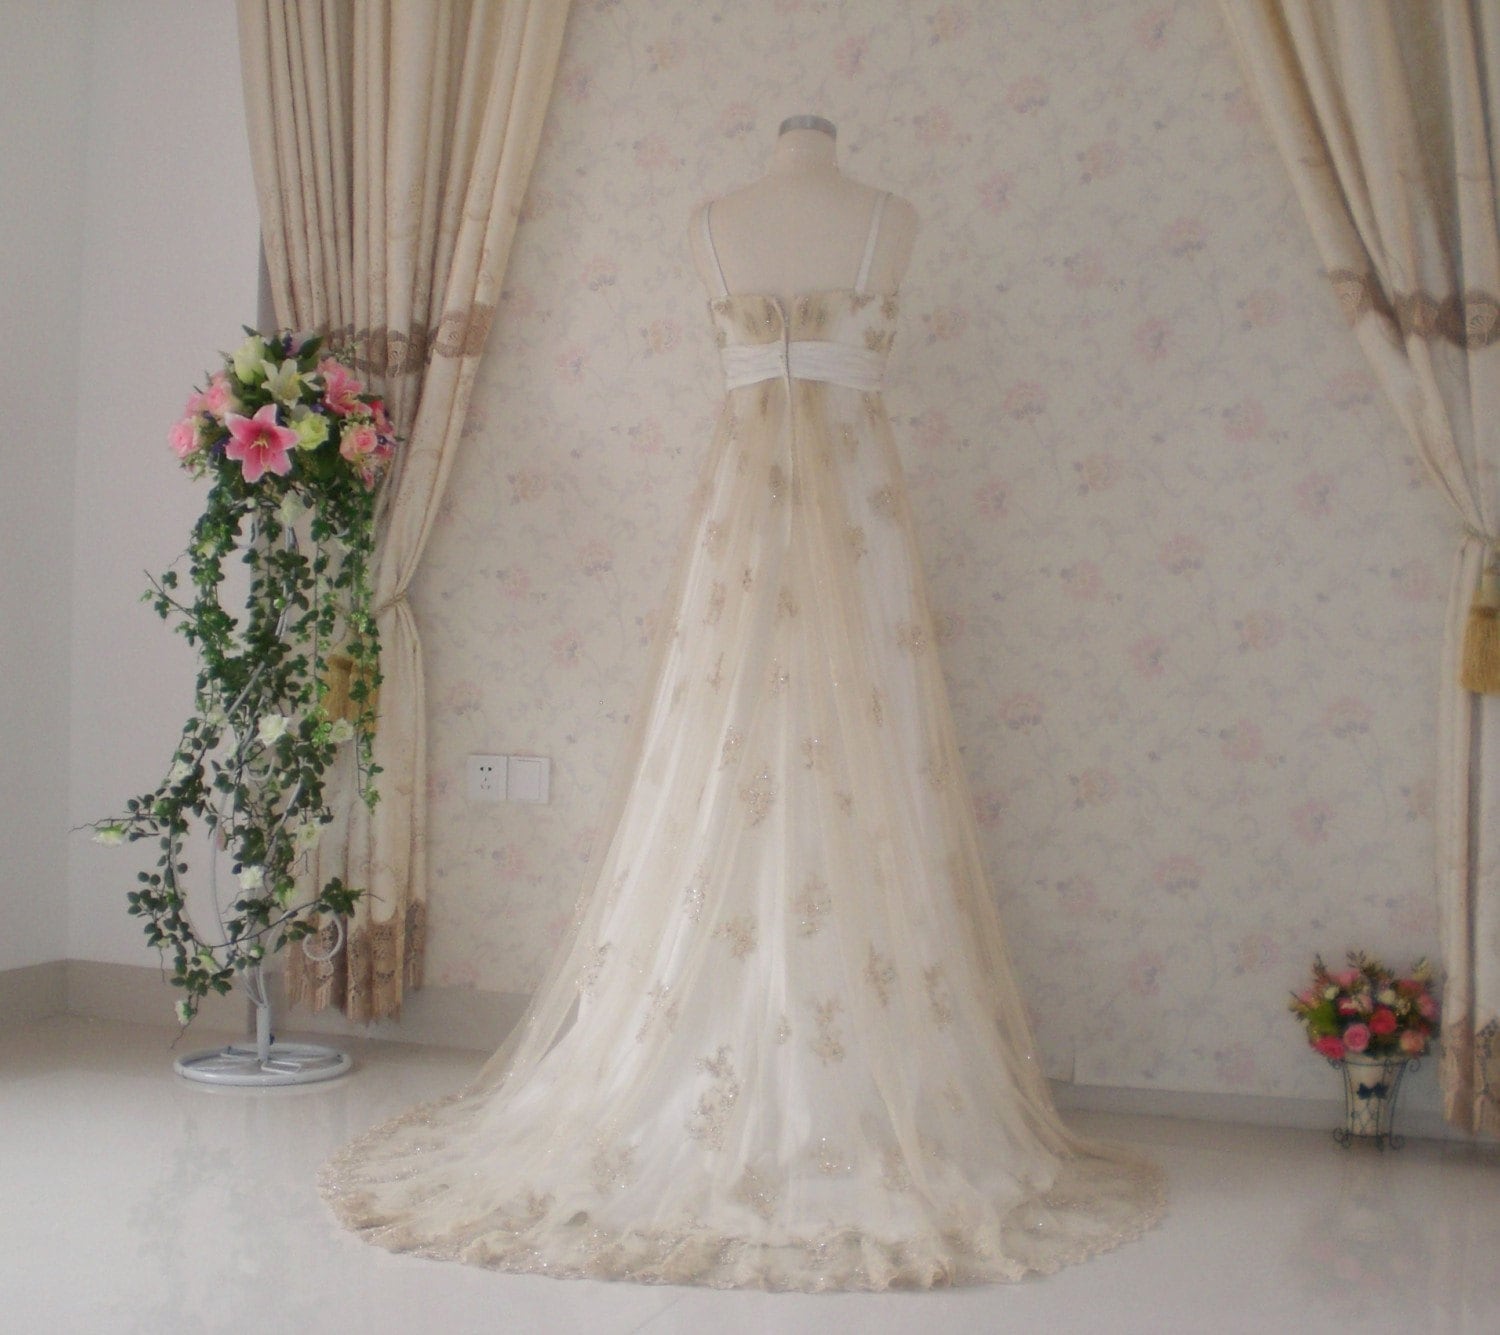 Vintage Inspired Wedding Dress With Light Gold Lace and - Etsy